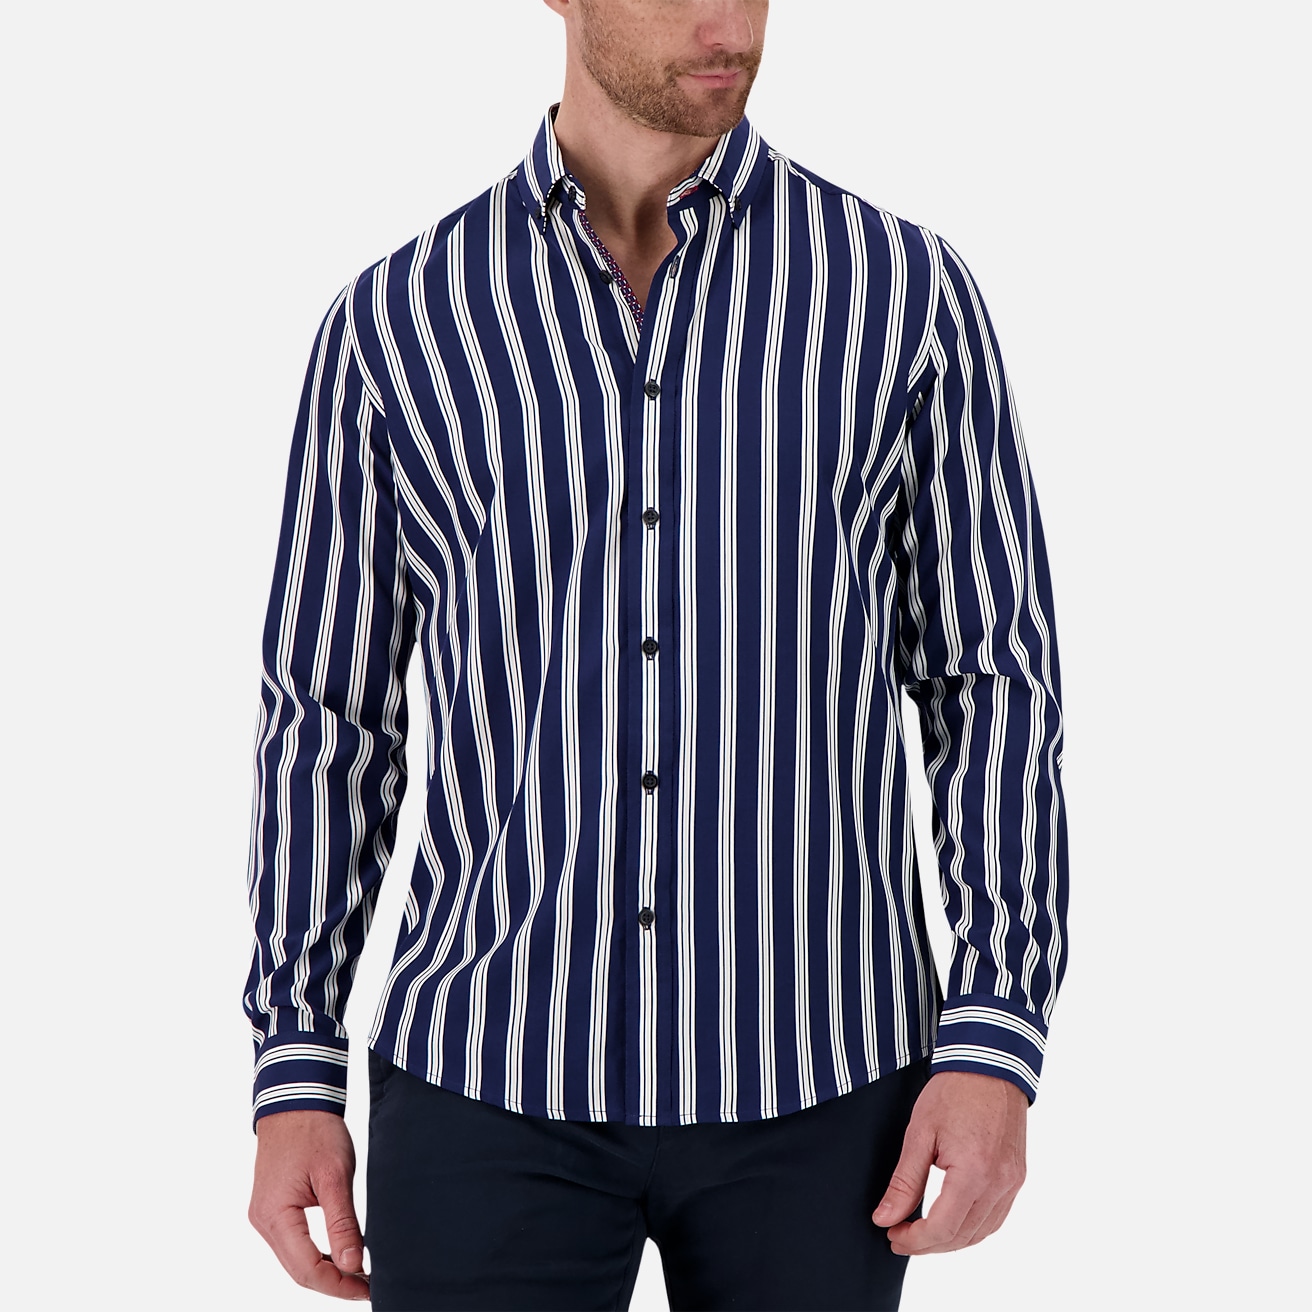 Soft vertical stripe shirt, Report Collection